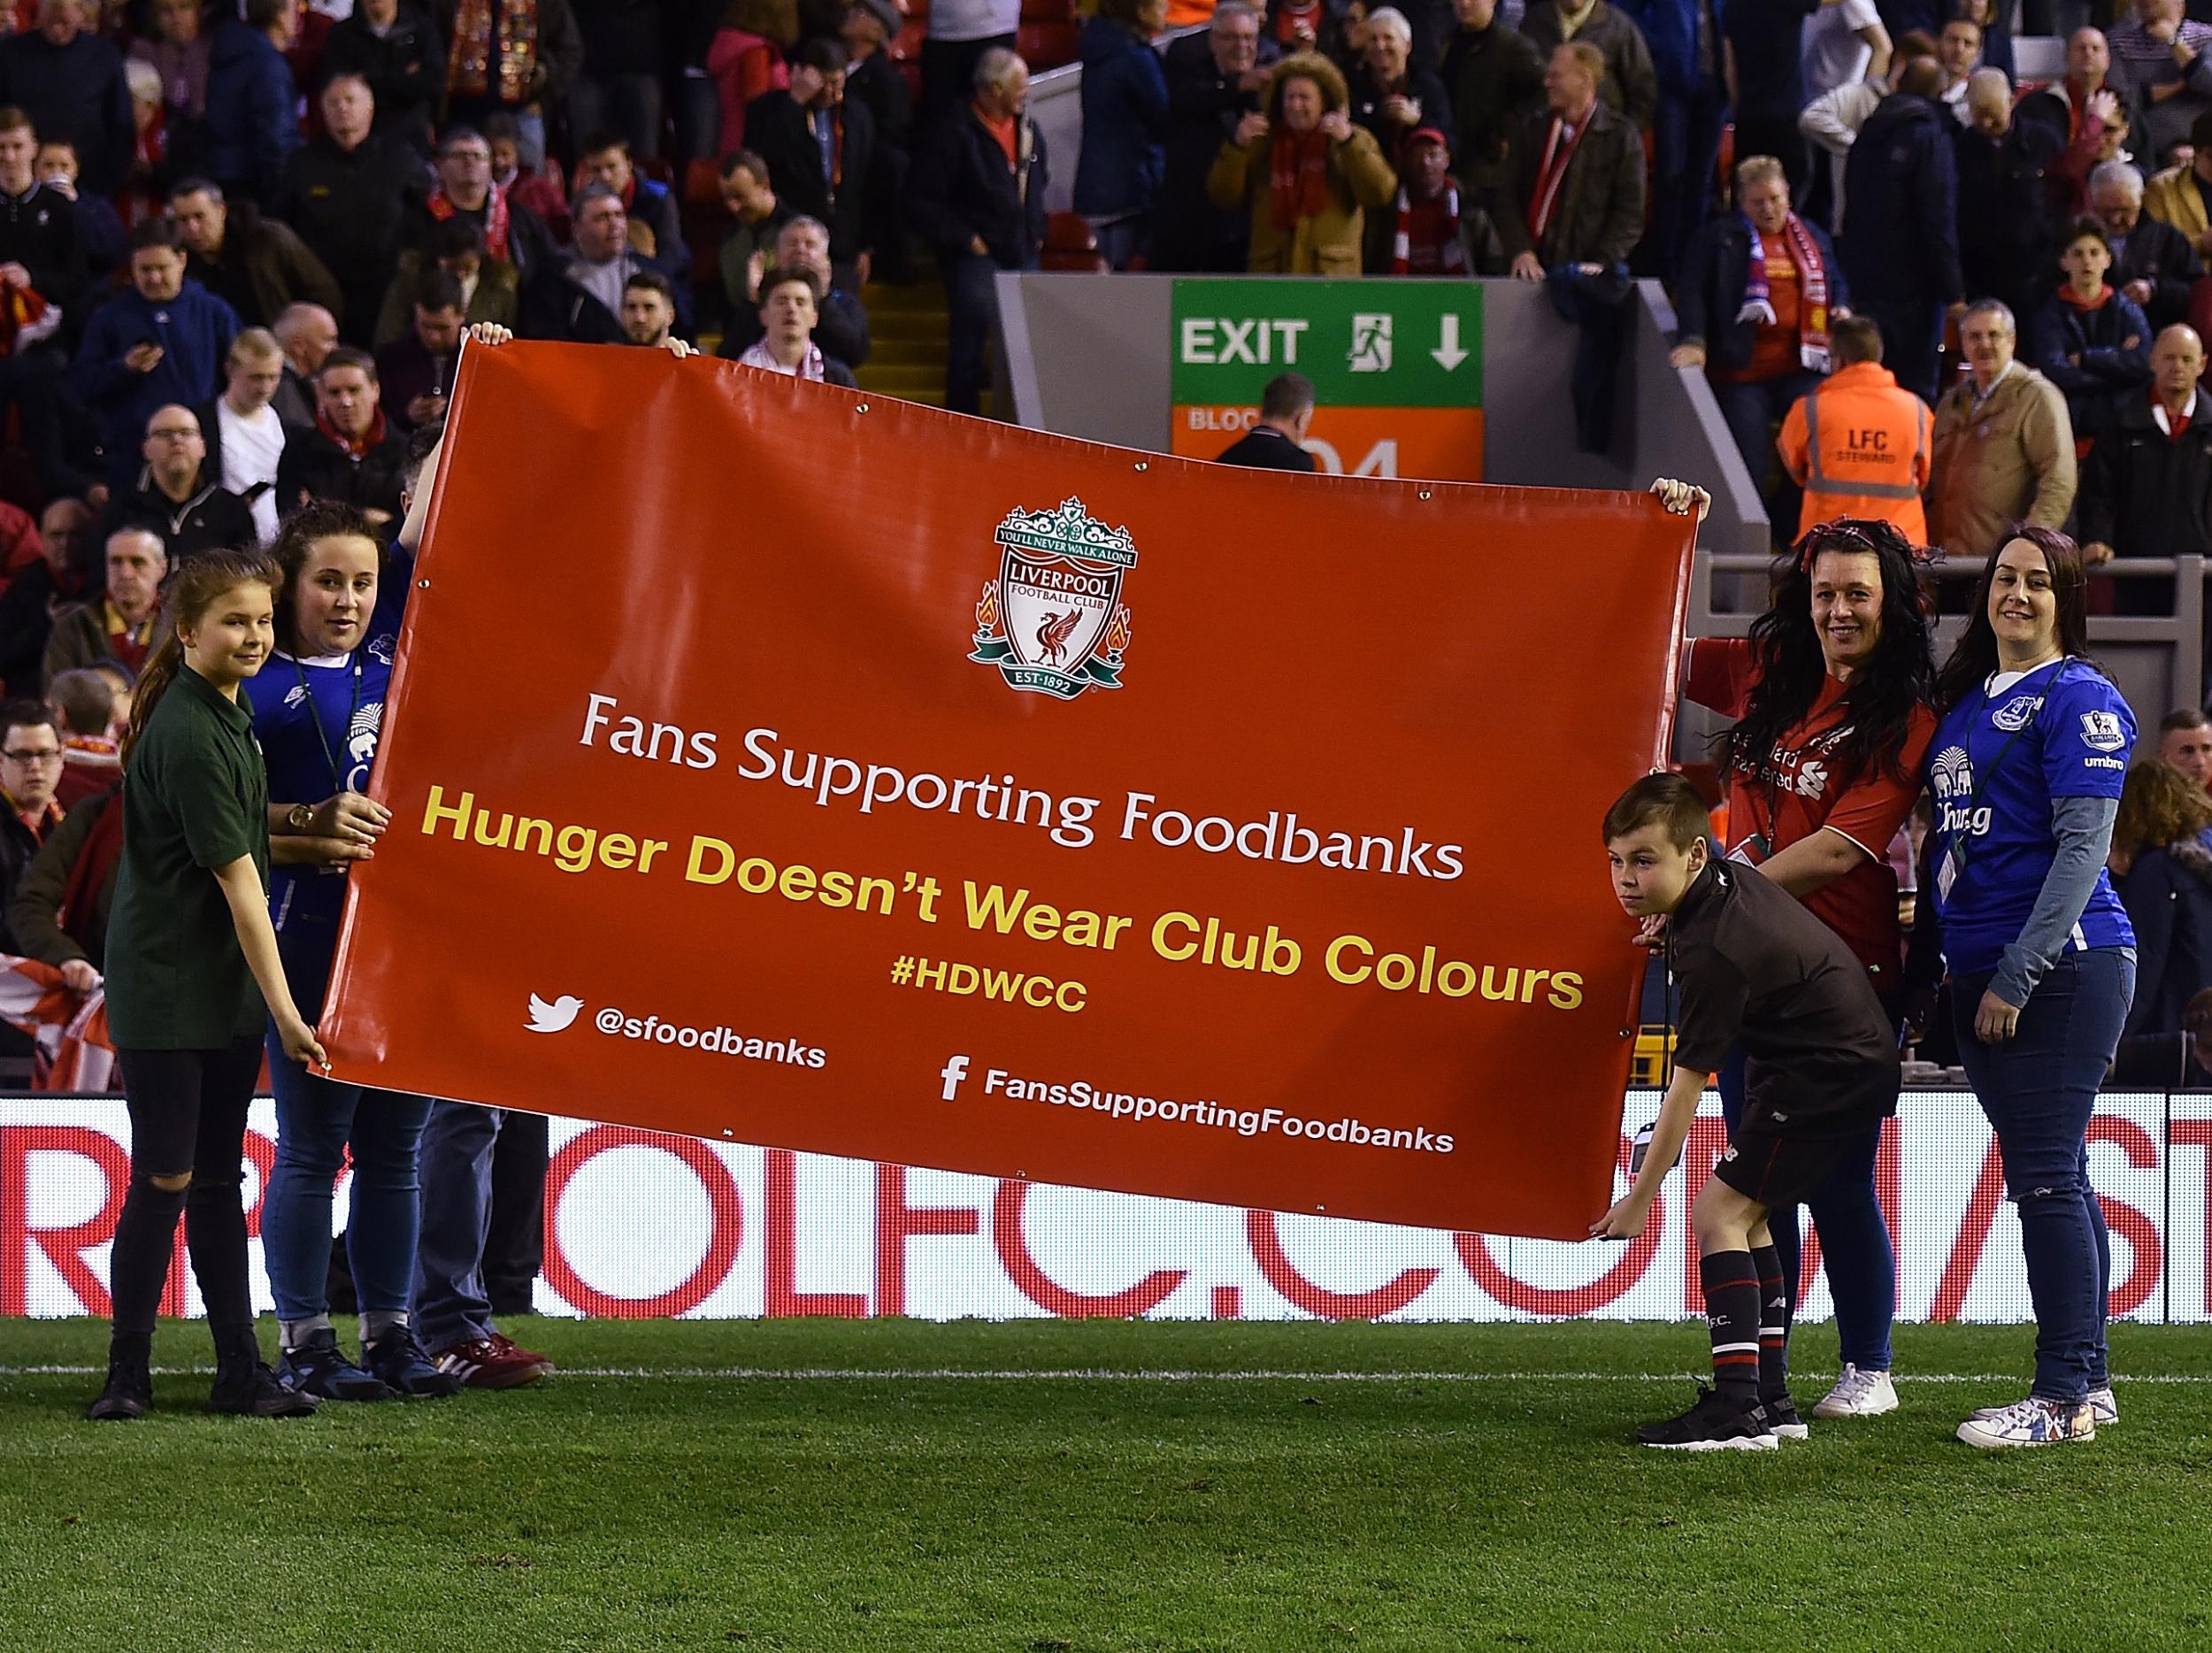 The Fans Supporting Foodbanks group